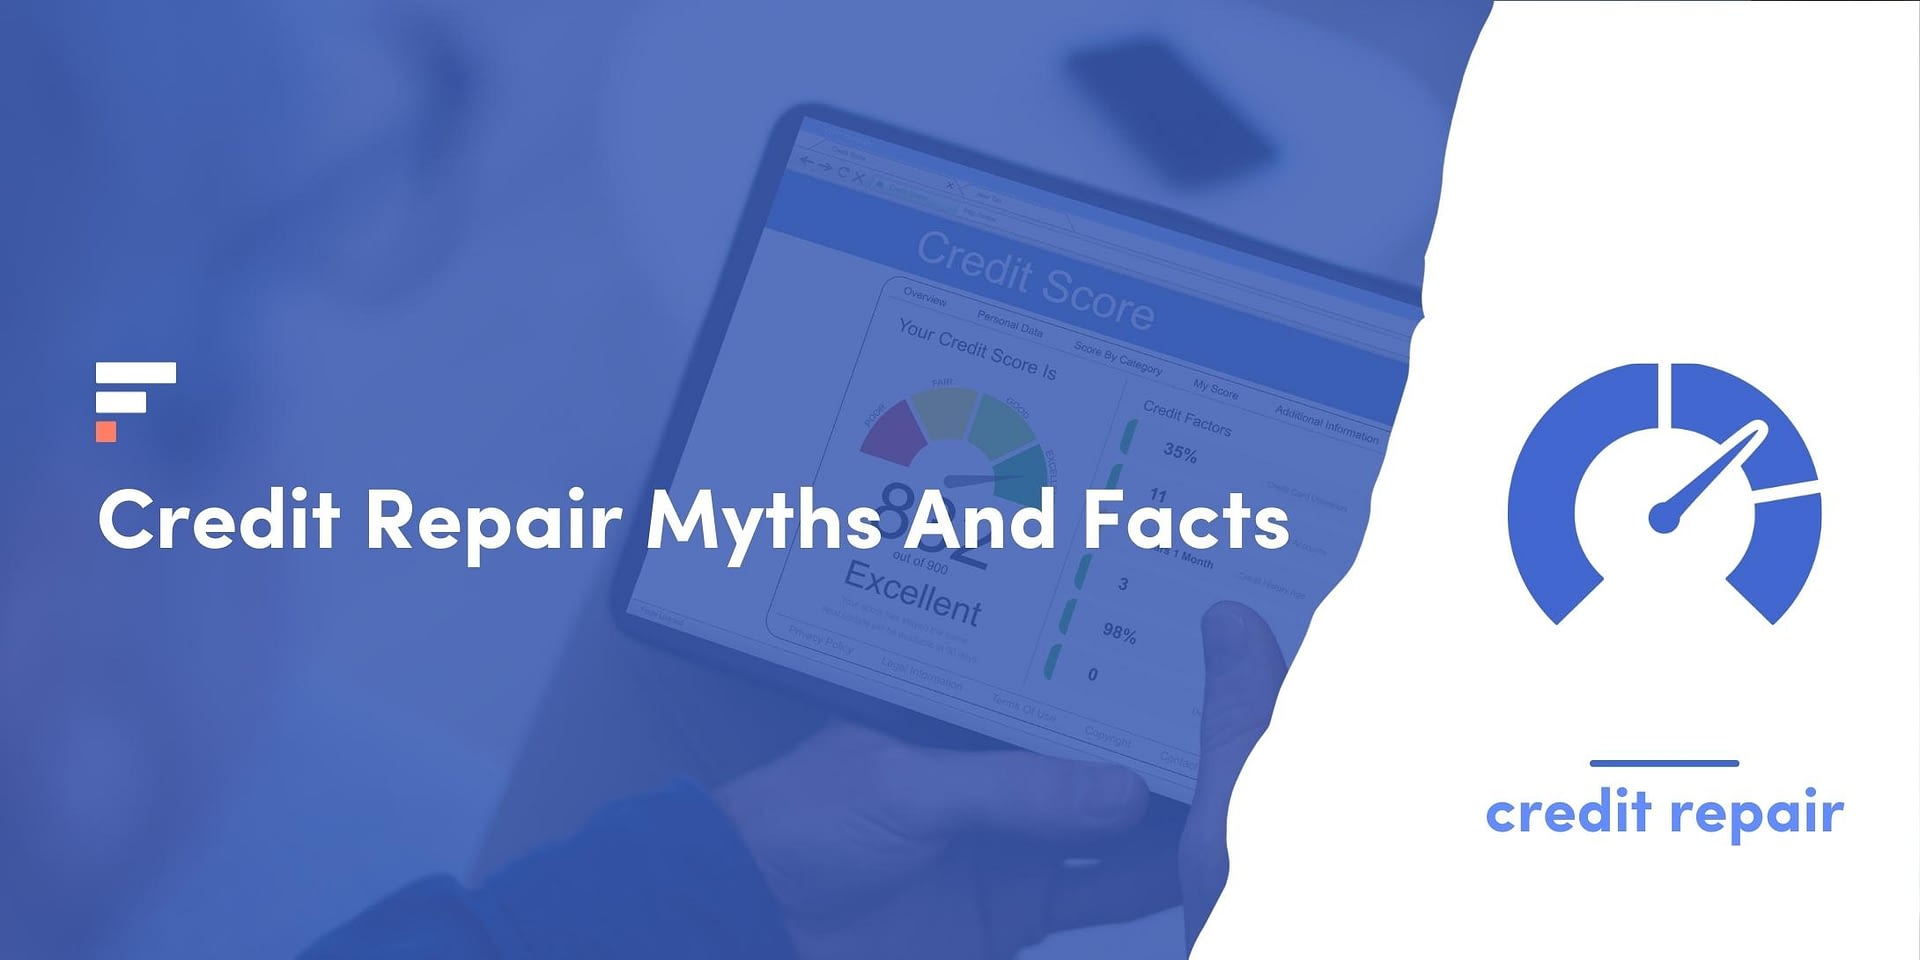 Credit Repair Myths And Facts